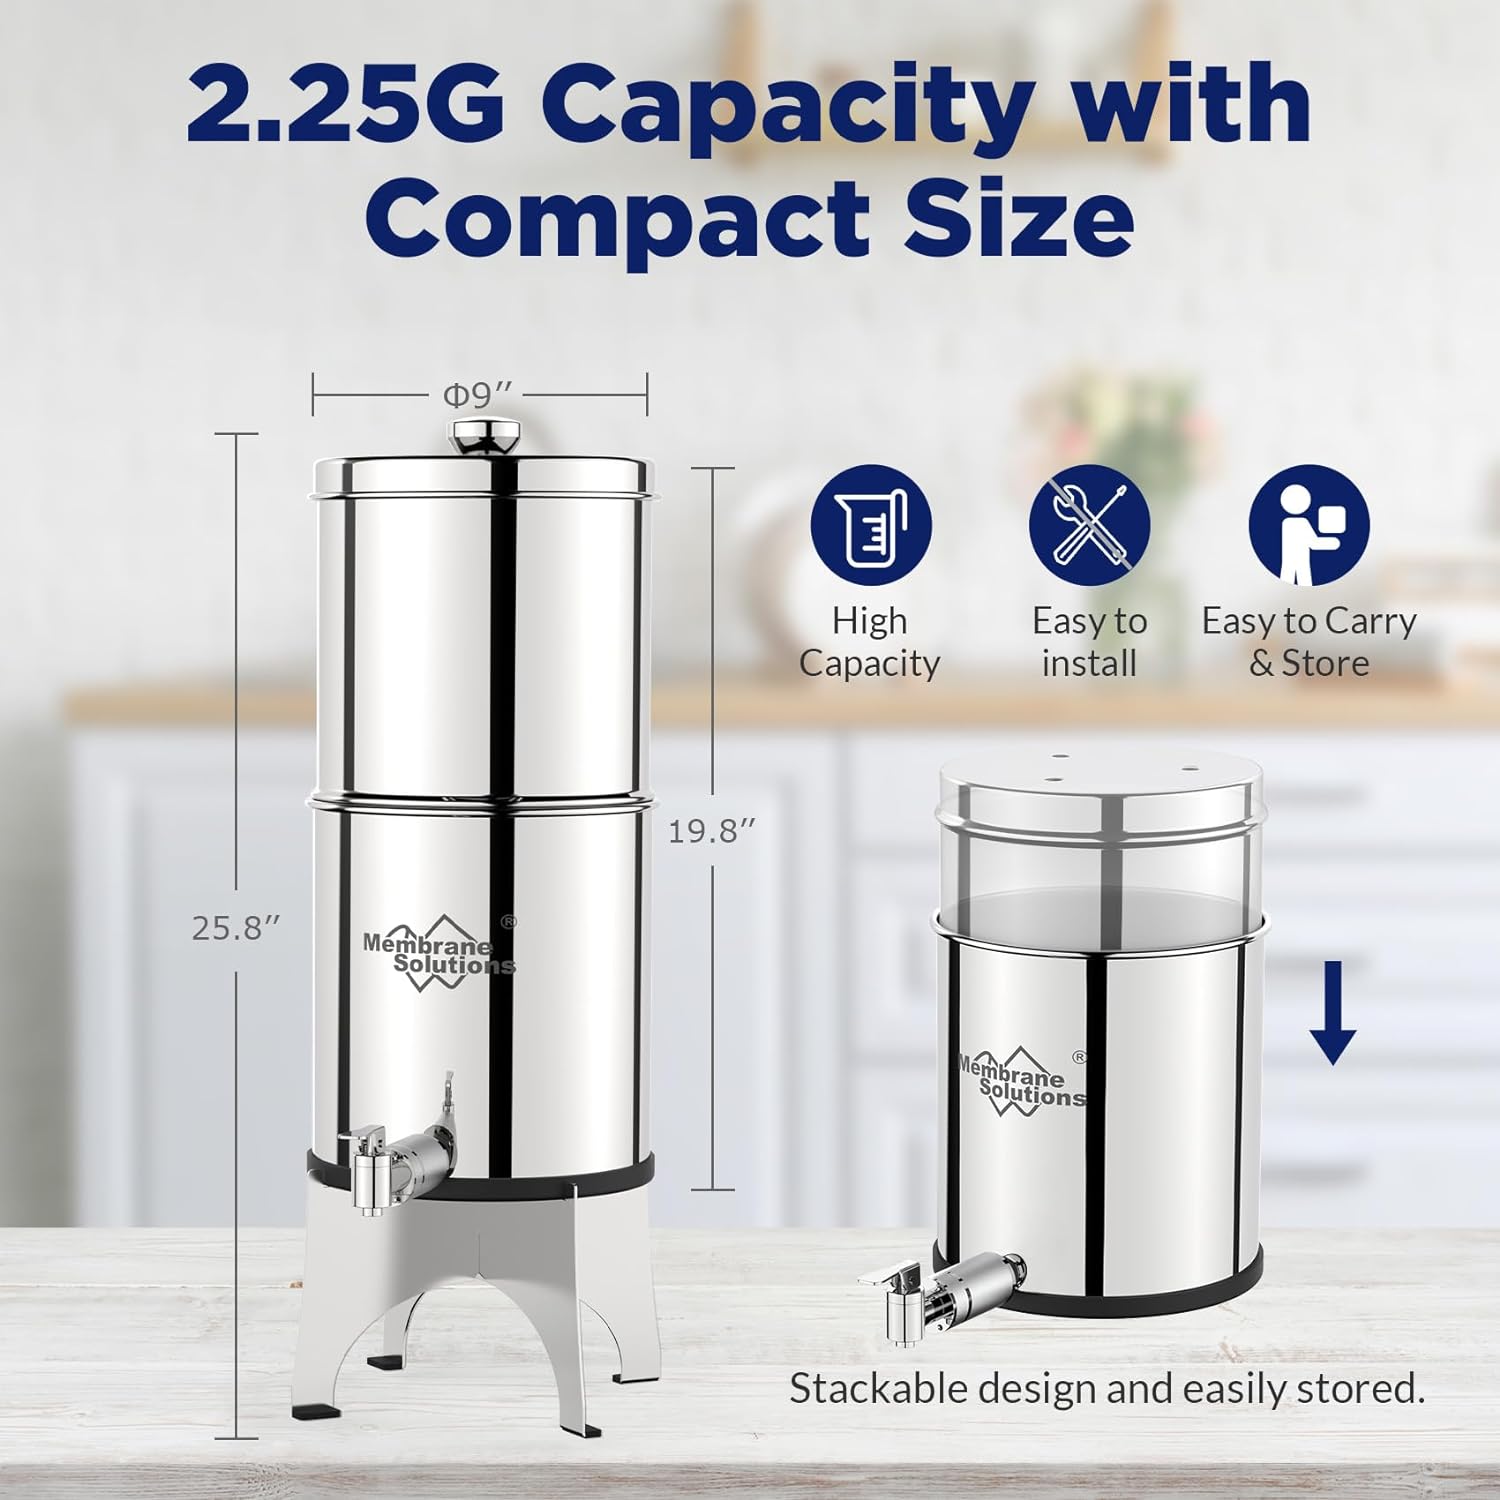 U3 Gravity Fed Water Filter 2.25 Gallons, Countertop UV Water Ststem with Stainless Steel Tank and 3 Packs of Berkey Filter Replacement